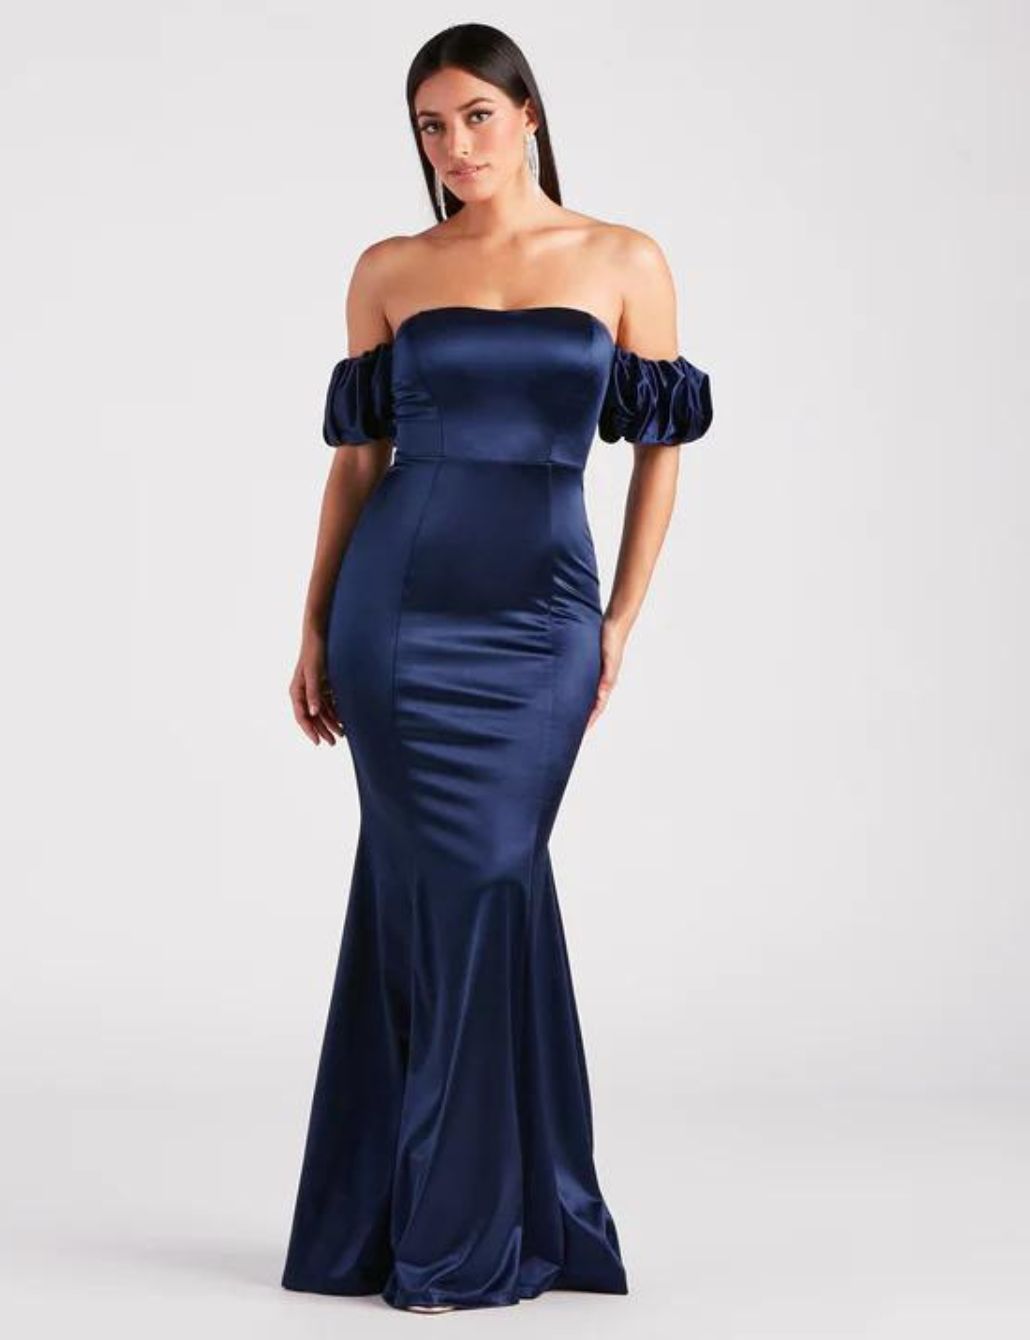 Windsor.com - legit? I'm in love with both of these dresses for a black tie  event coming up however ive read mixed reviews. Can I hear people's  experiences before ordering please? (I'm